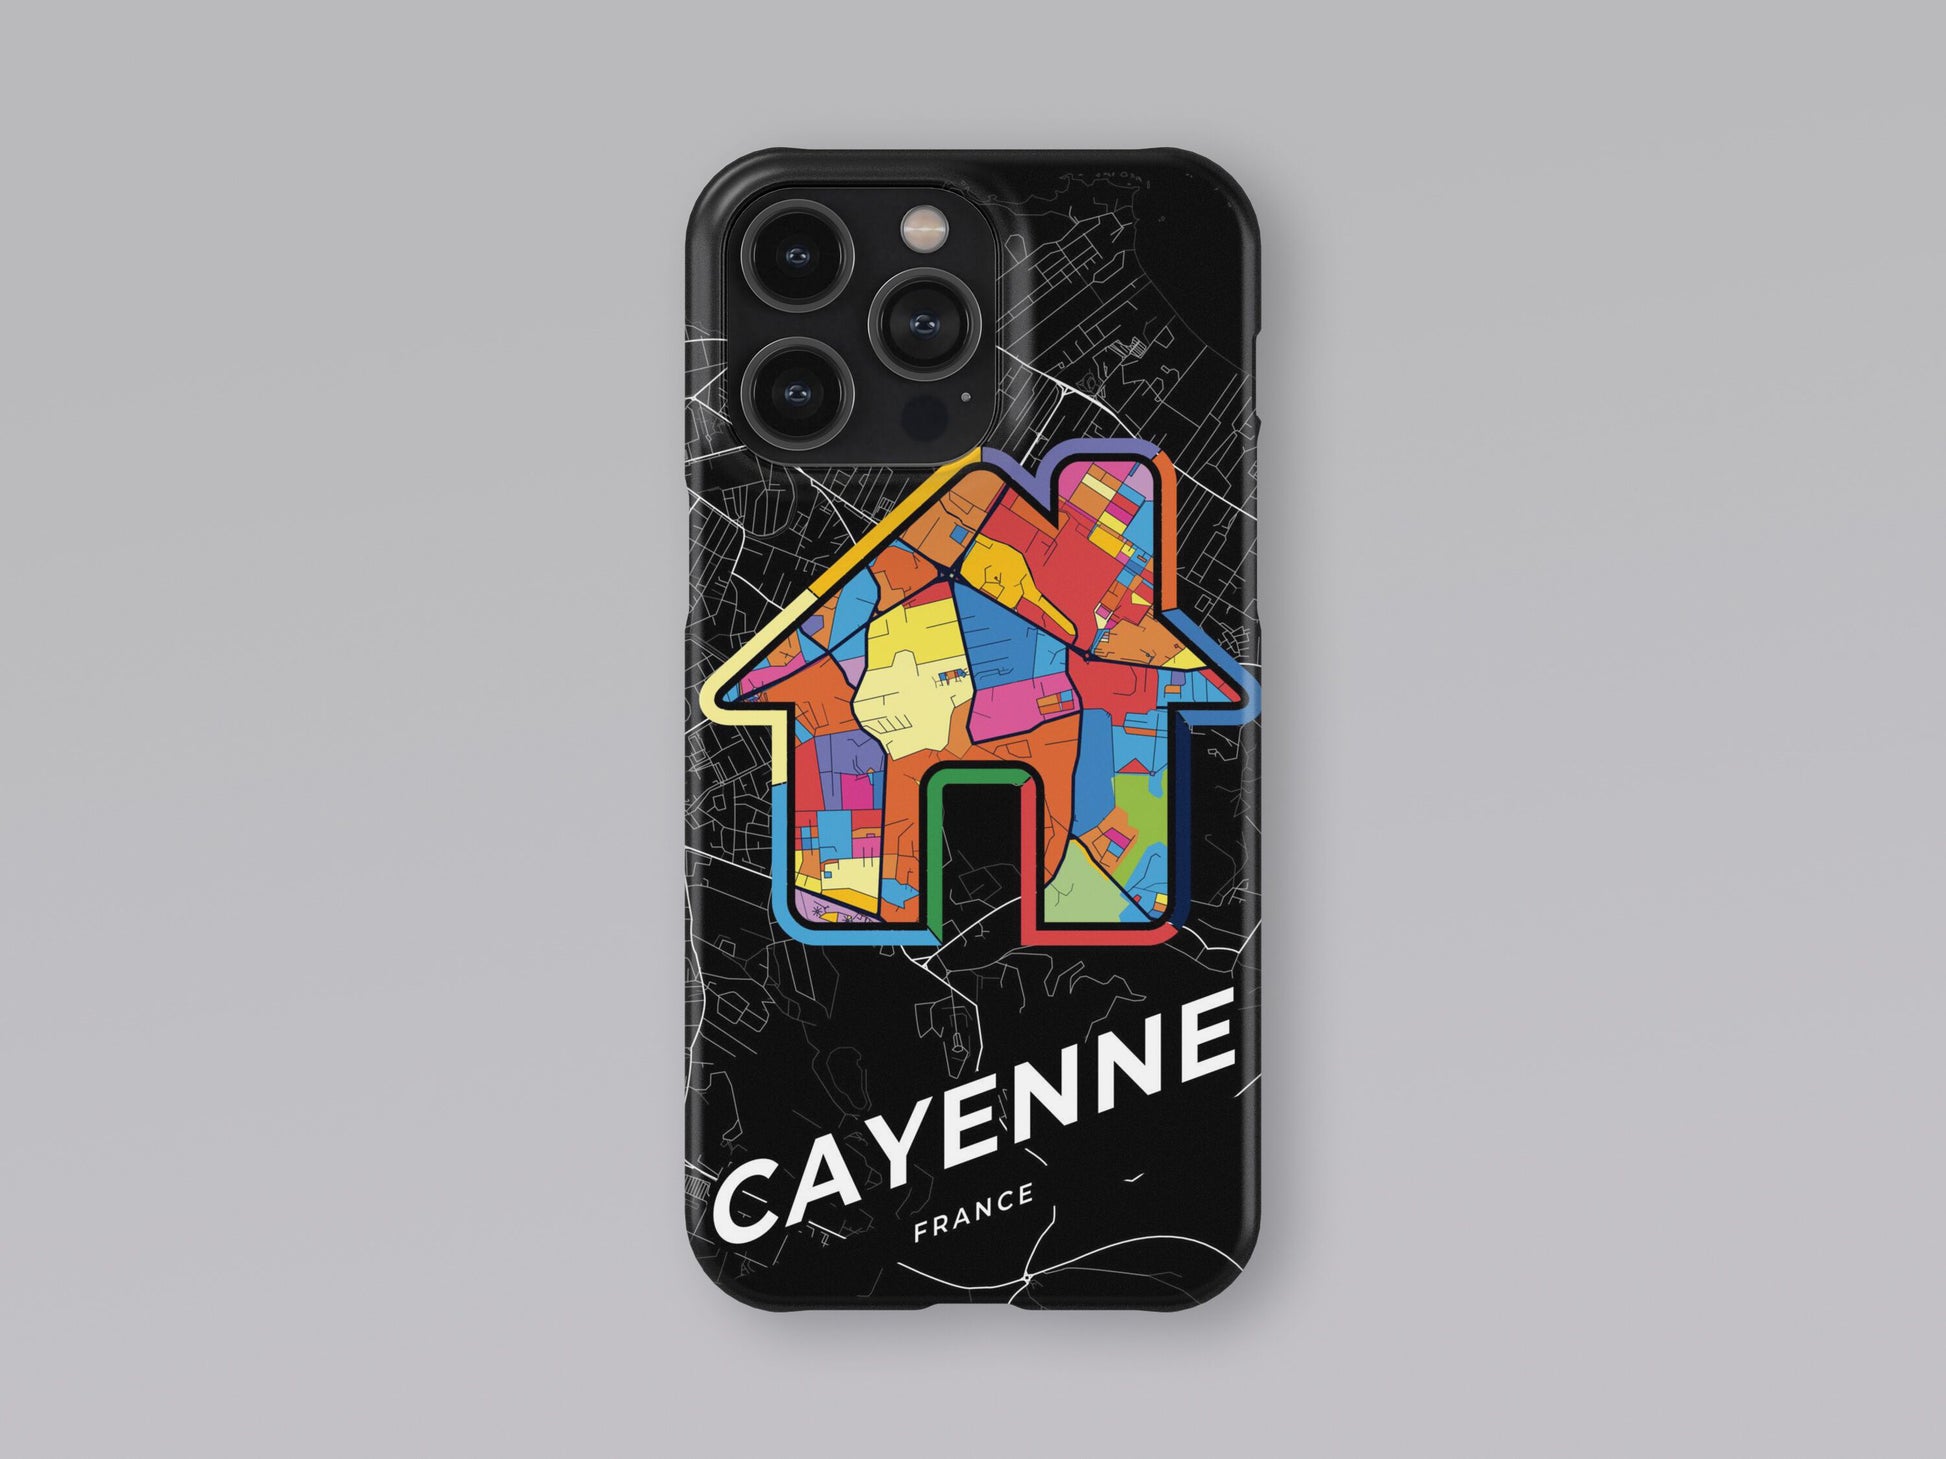 Cayenne France slim phone case with colorful icon. Birthday, wedding or housewarming gift. Couple match cases. 3